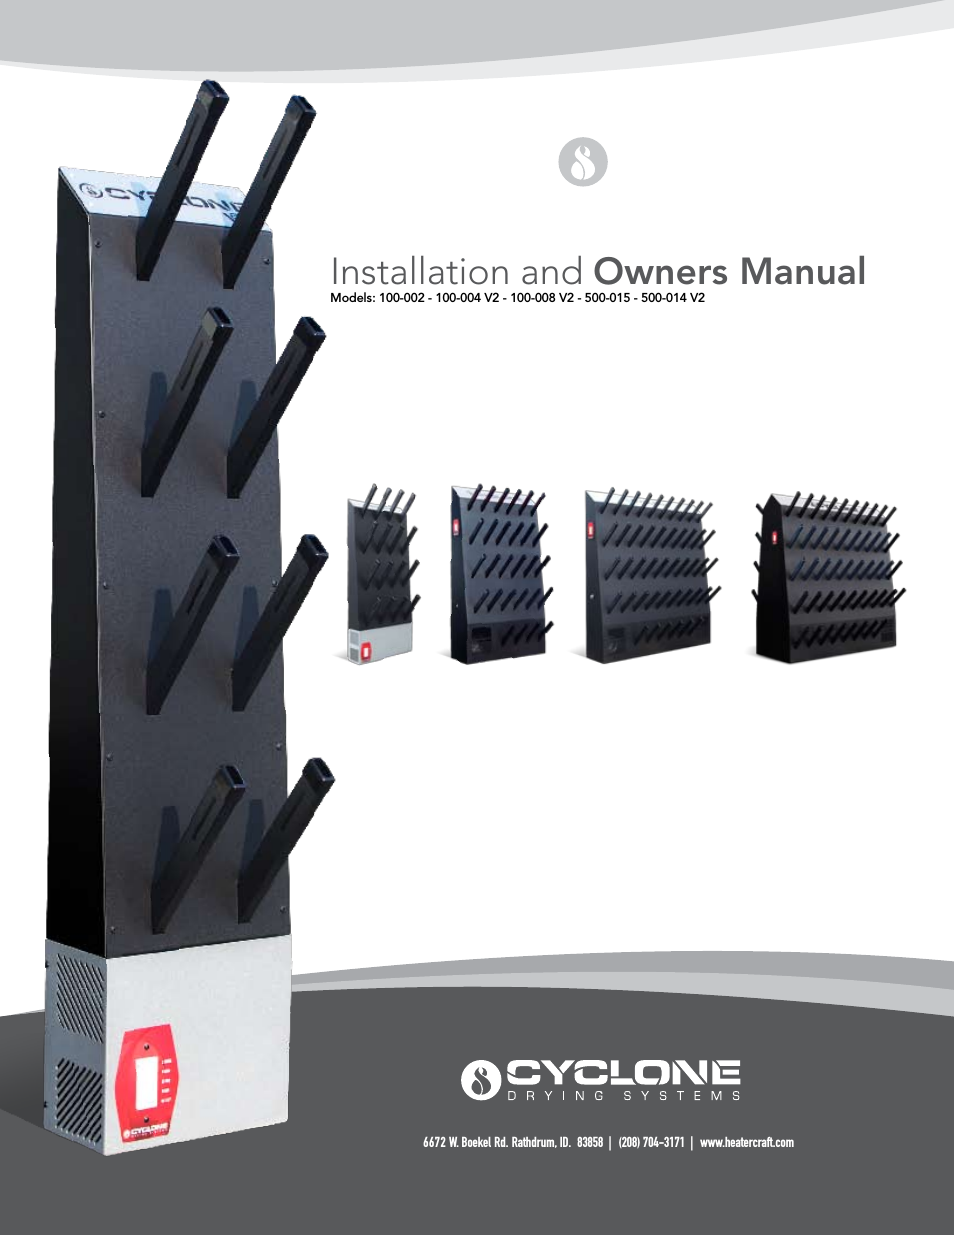 100-004 V2 Cyclone drying systems